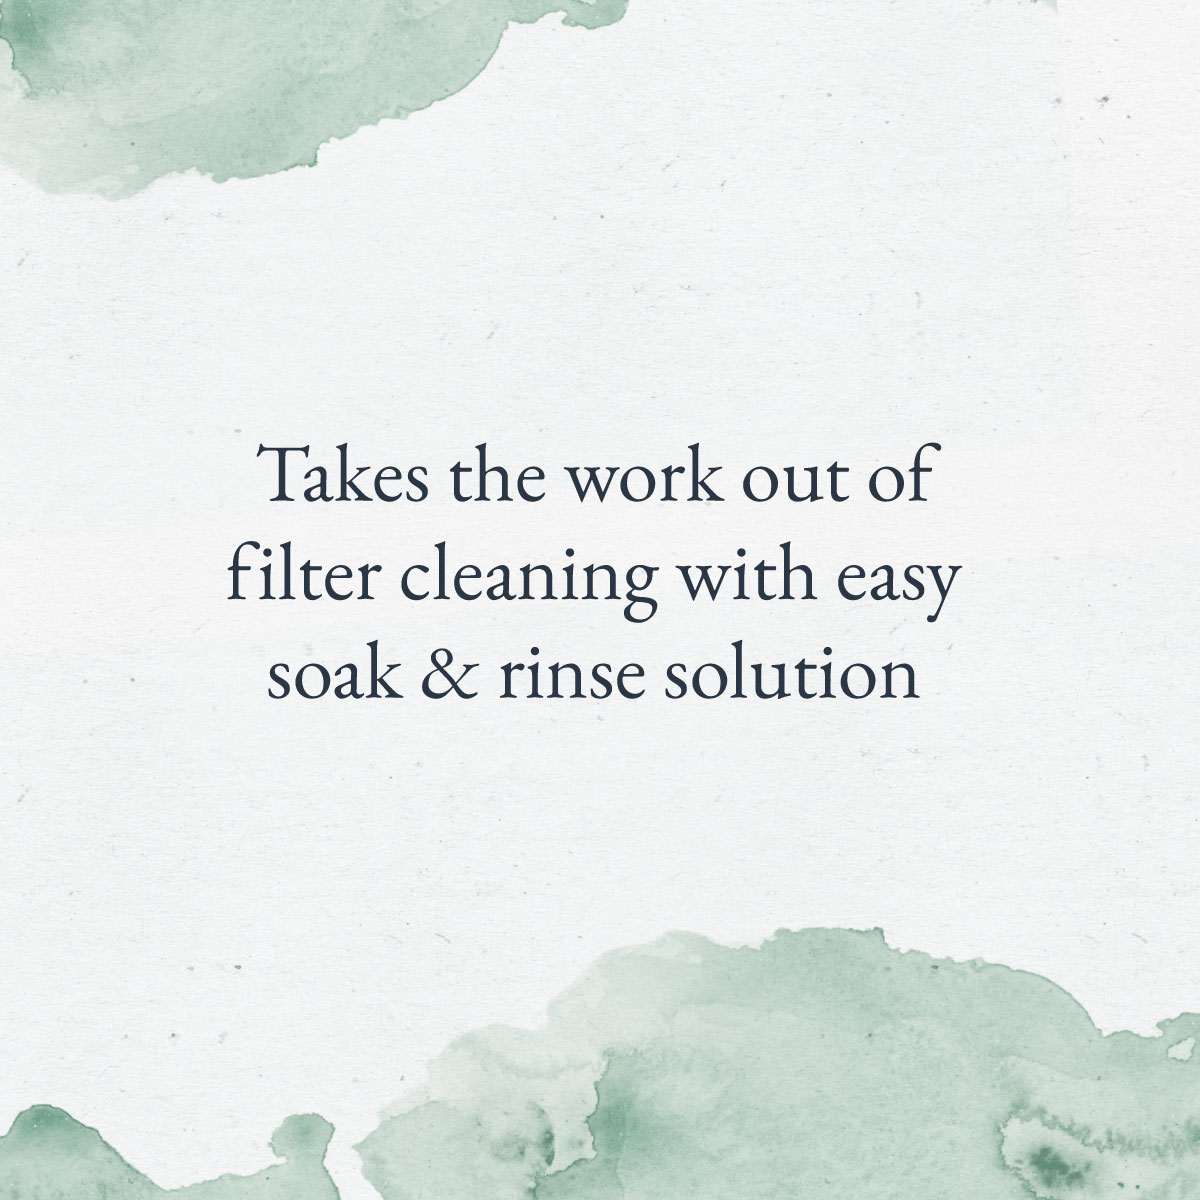 Takes the work out of filter cleaning with easy soak & rinse solution